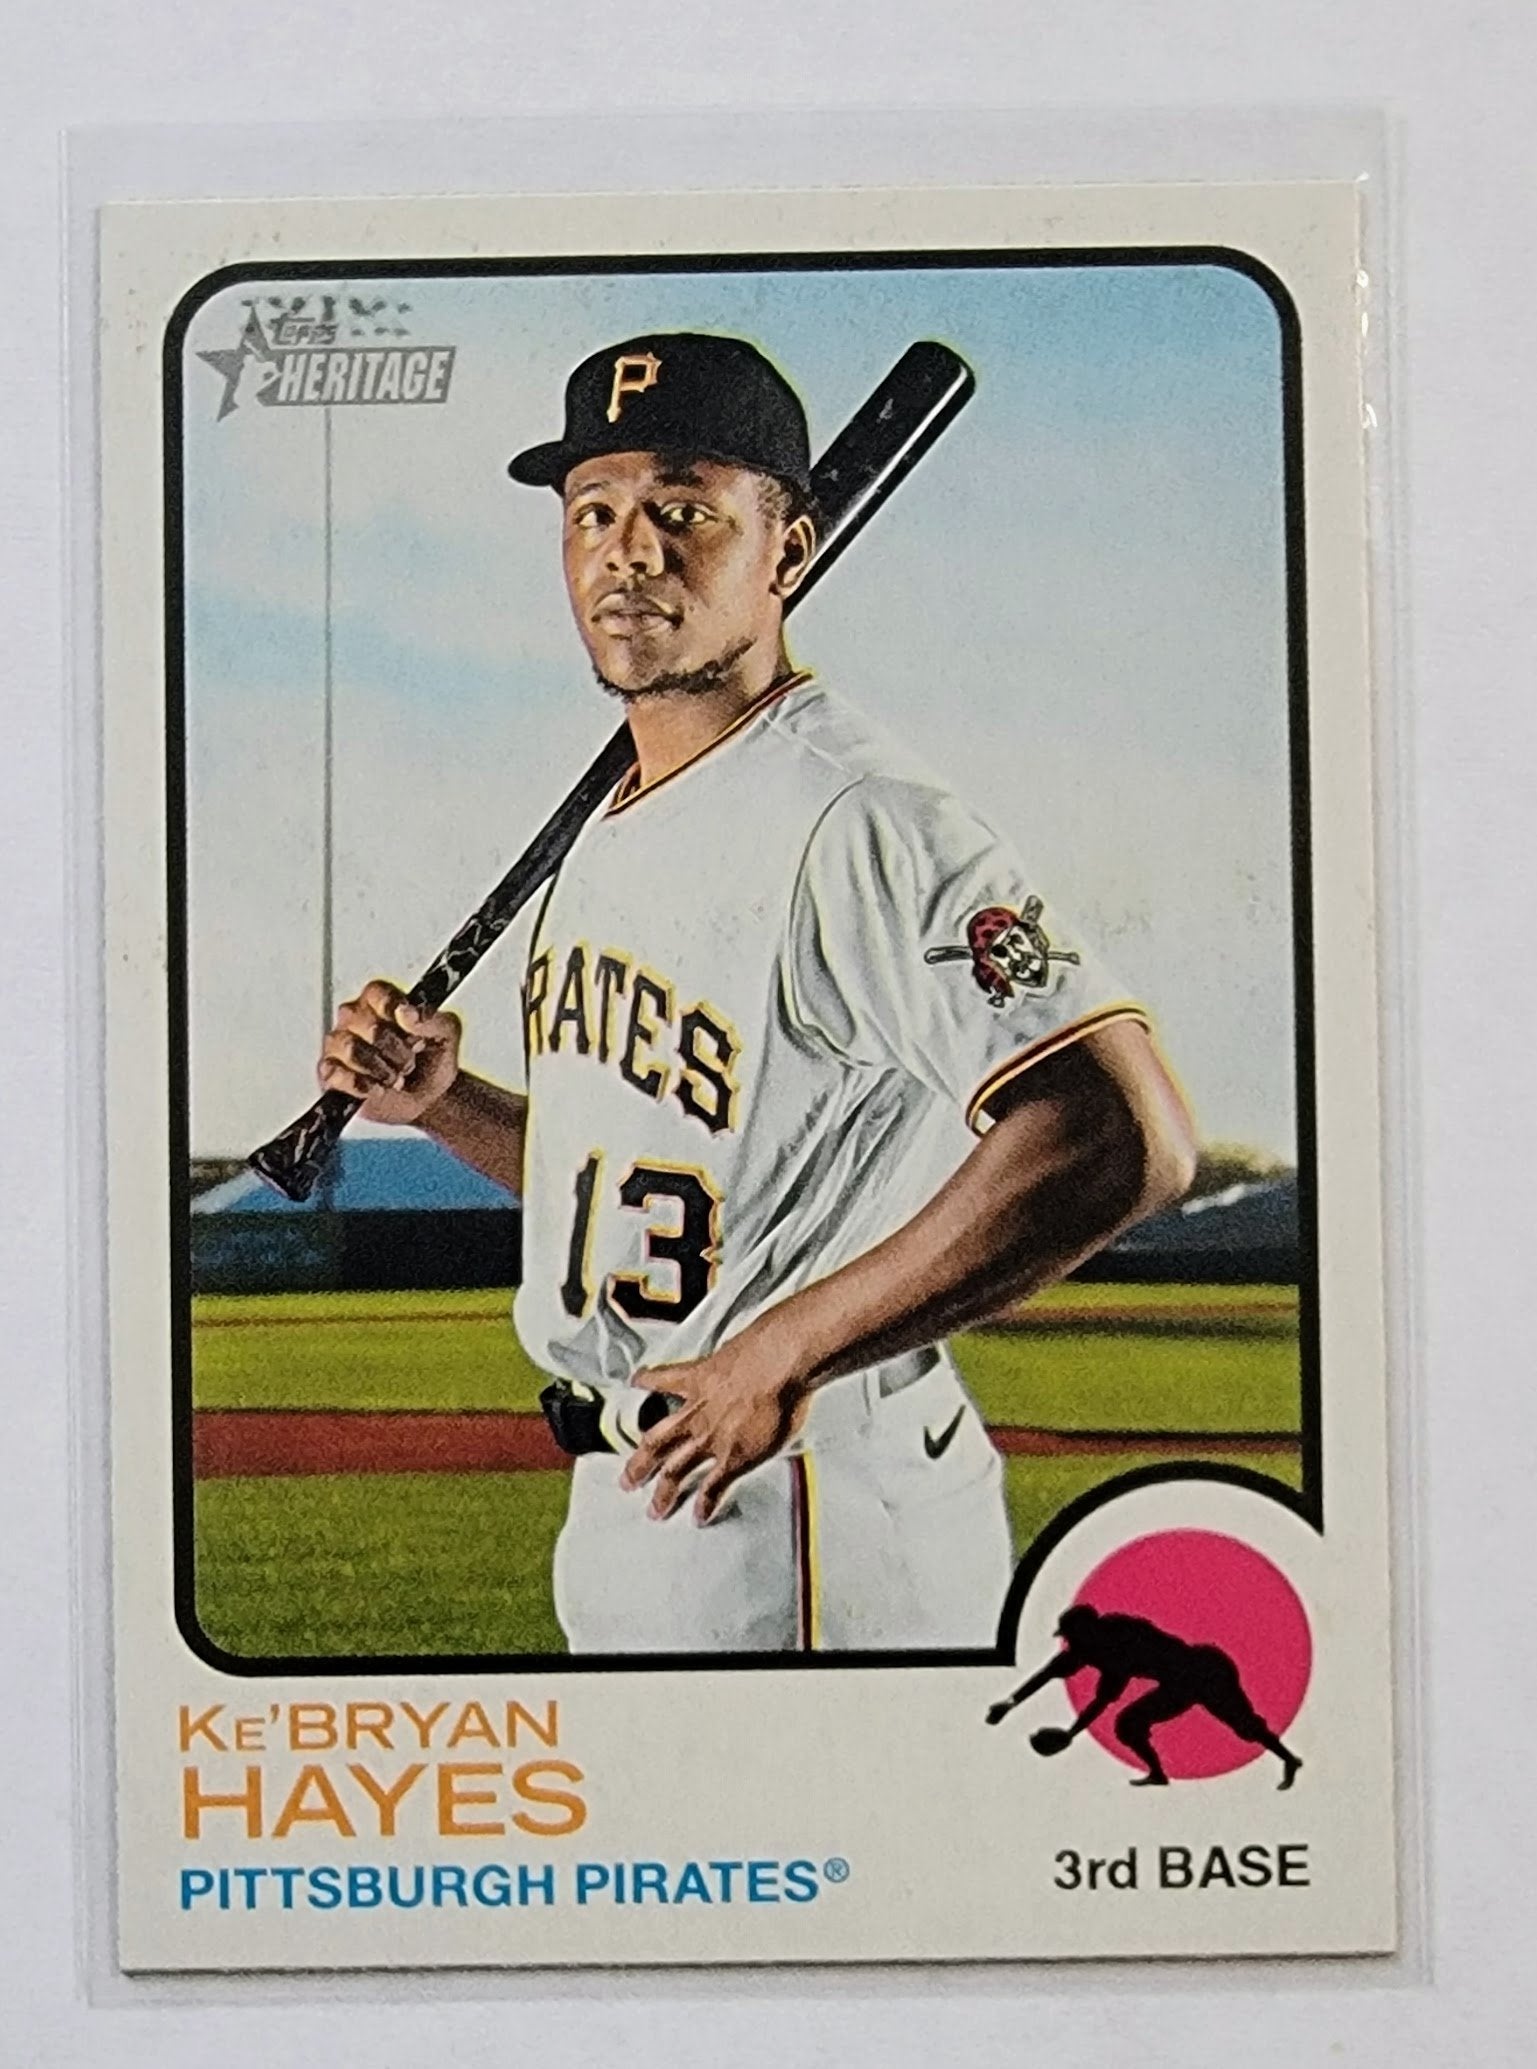 2022 Topps Heritage Ke'Bryan Hayes Baseball Card AVM1 simple Xclusive Collectibles   